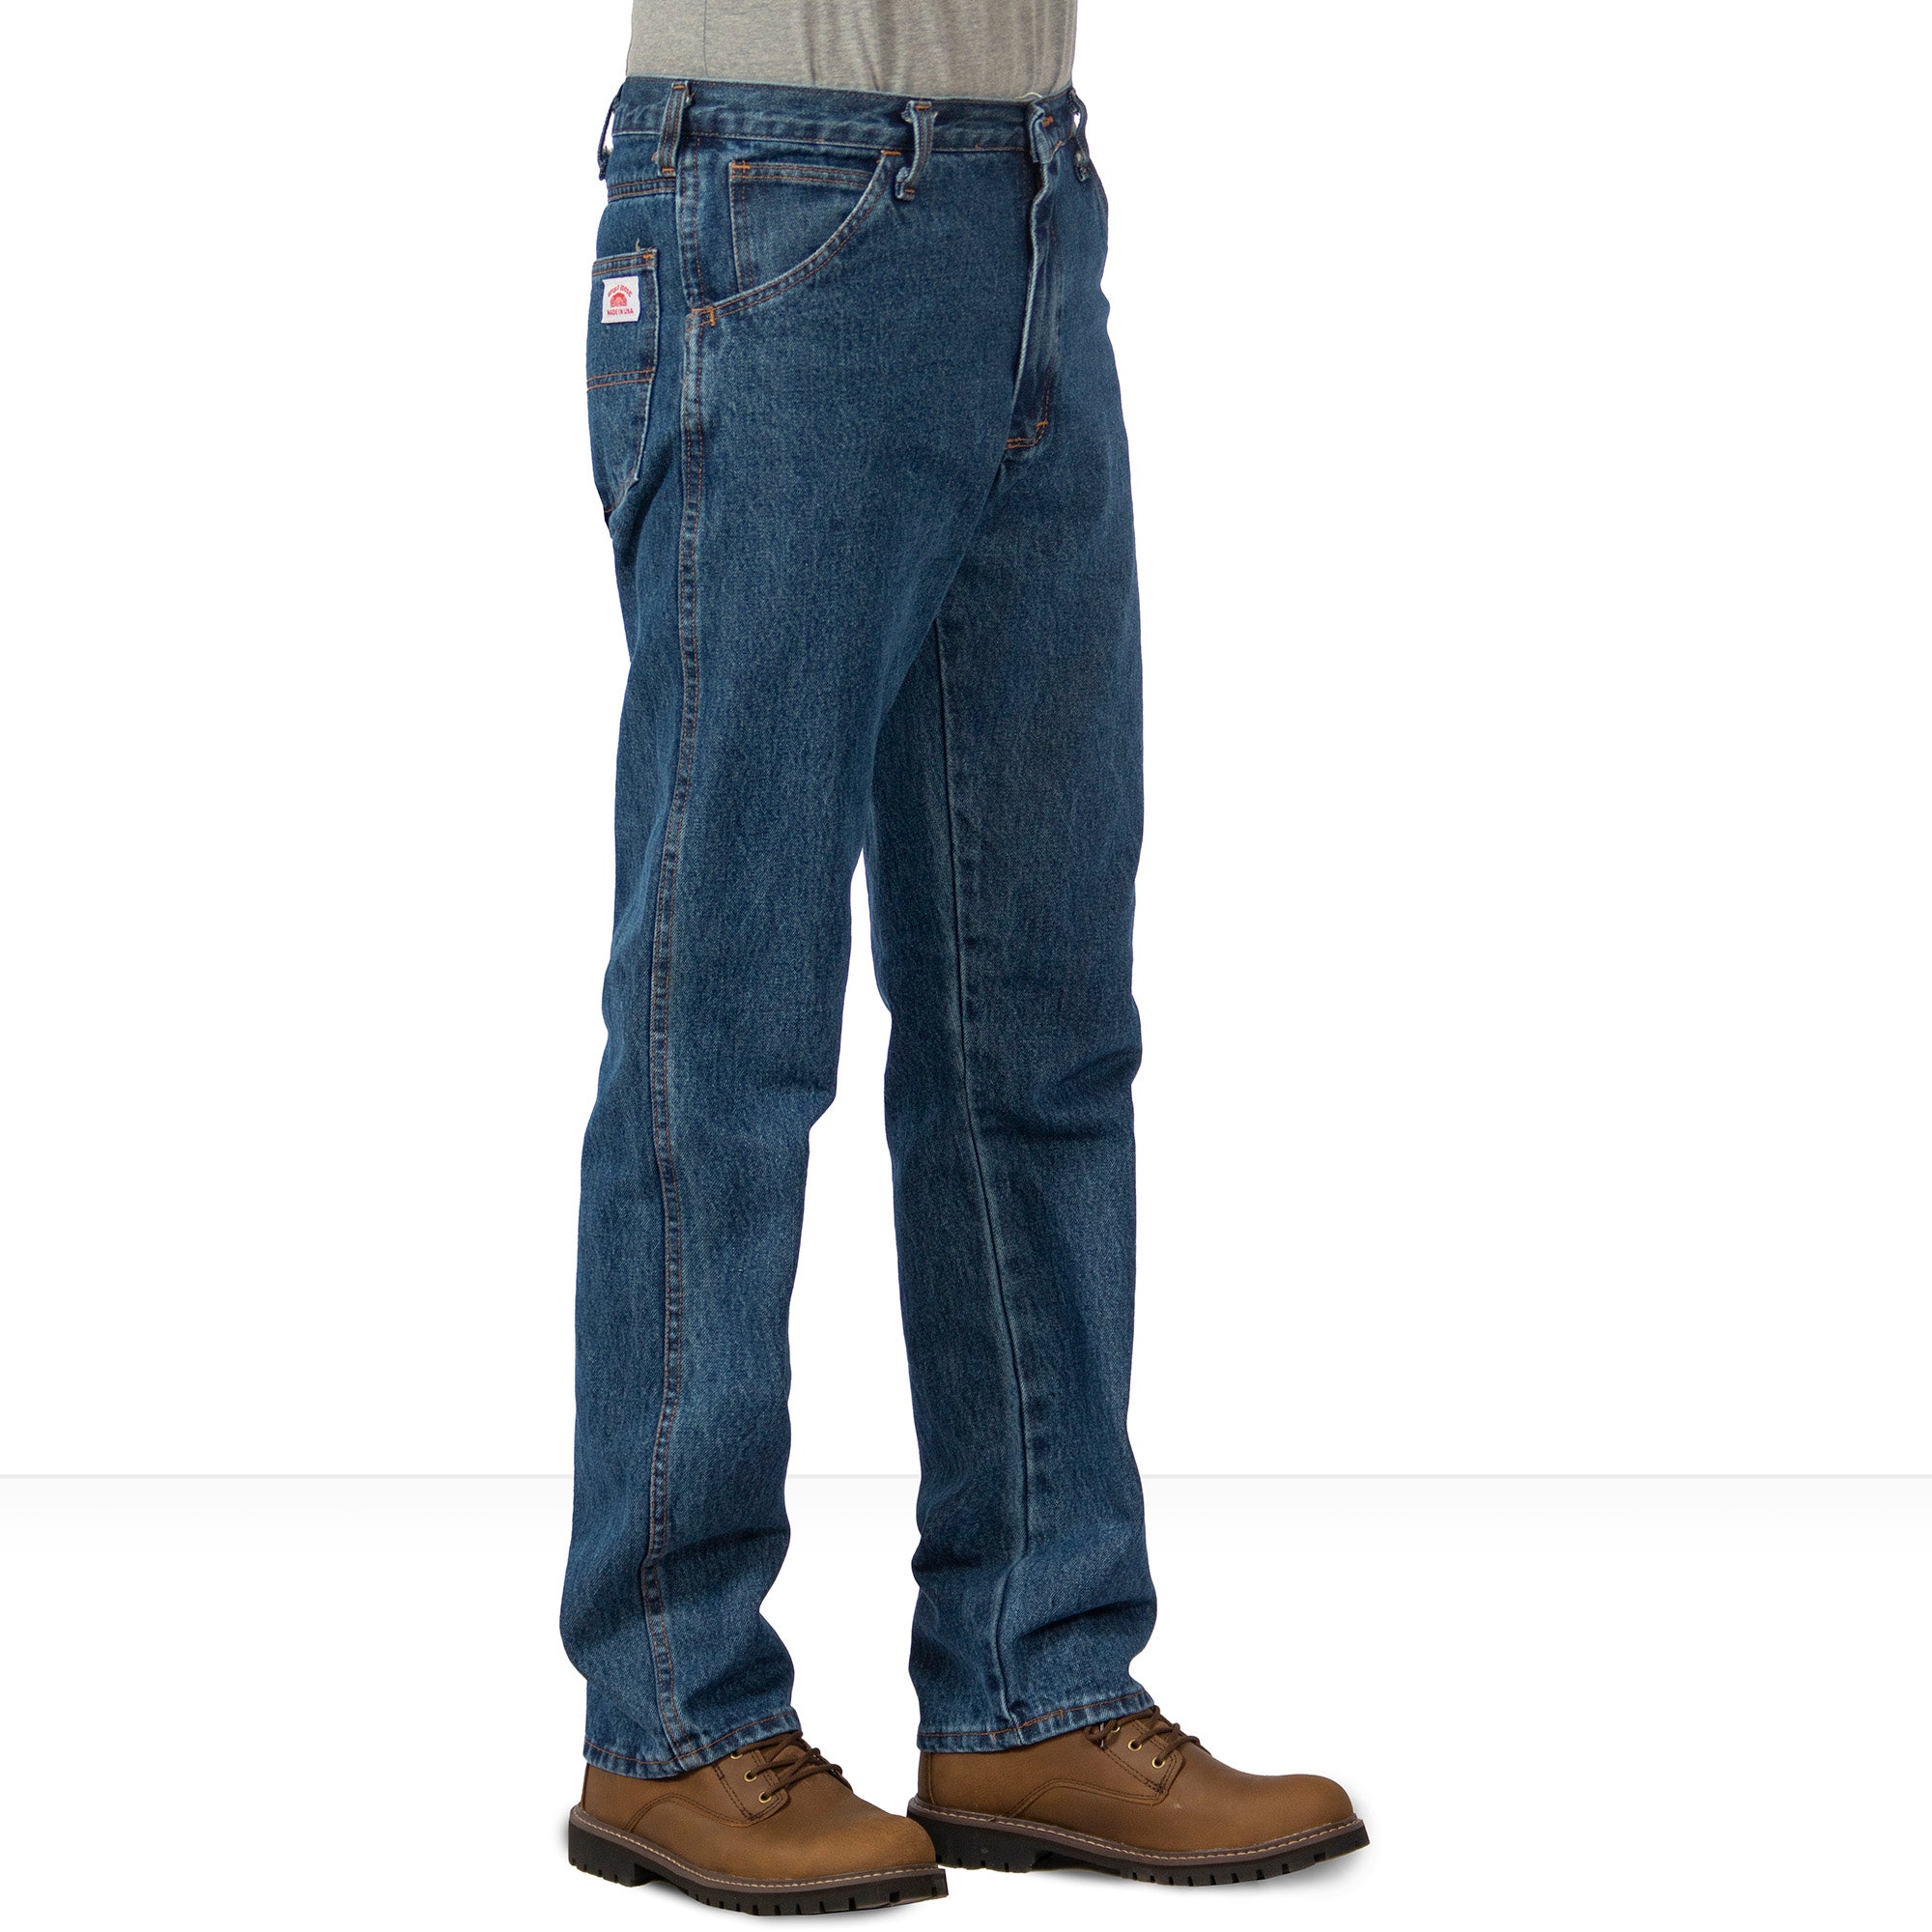 105 American Made Jeans Regular Fit 14 oz 5 Pocket Jeans Made in USA –  Round House American Made Jeans Made in USA Overalls, Workwear